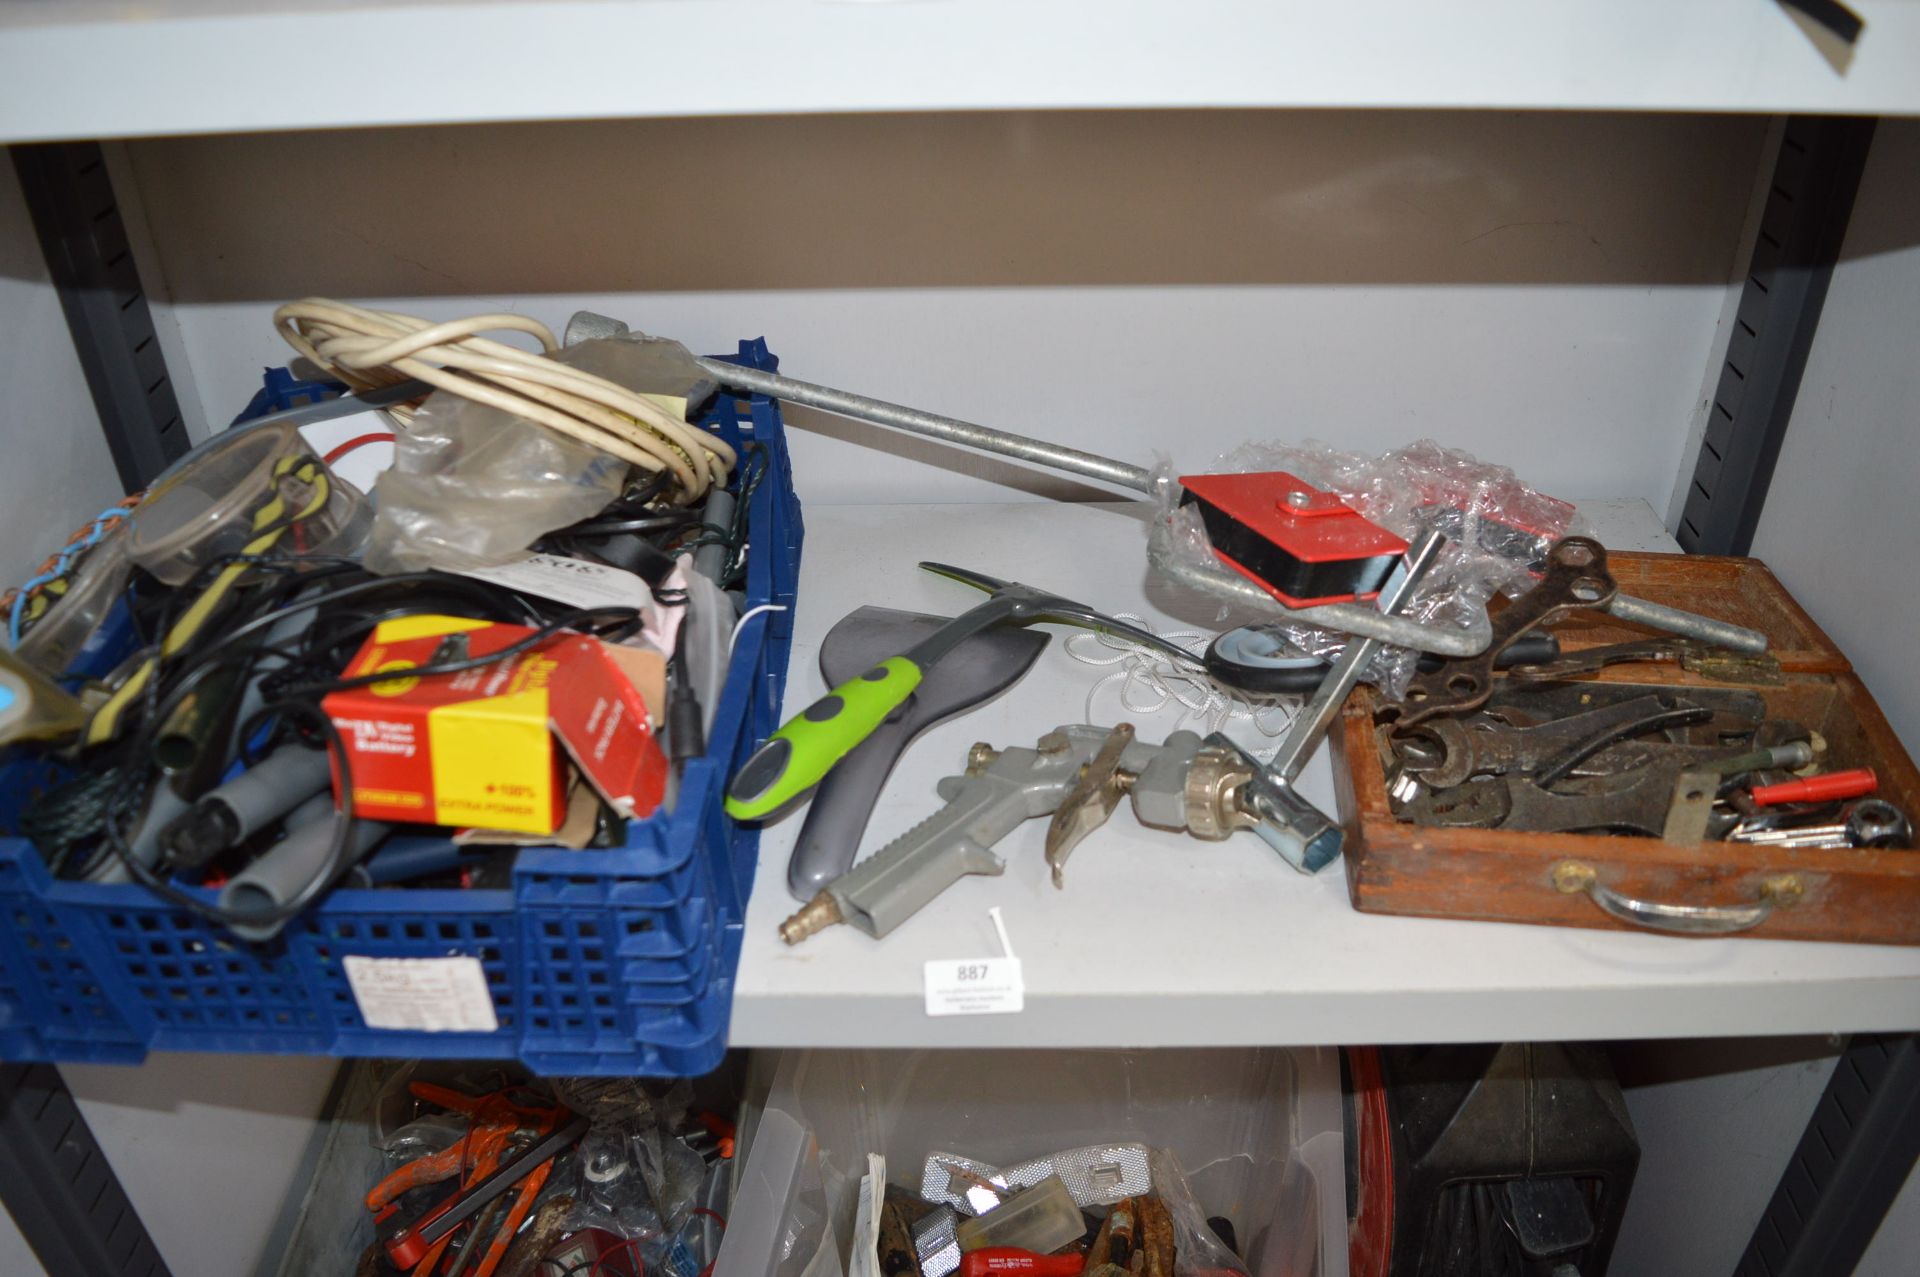 Contents of Shelf to Include Bicycle Spanners, Spray, etc.